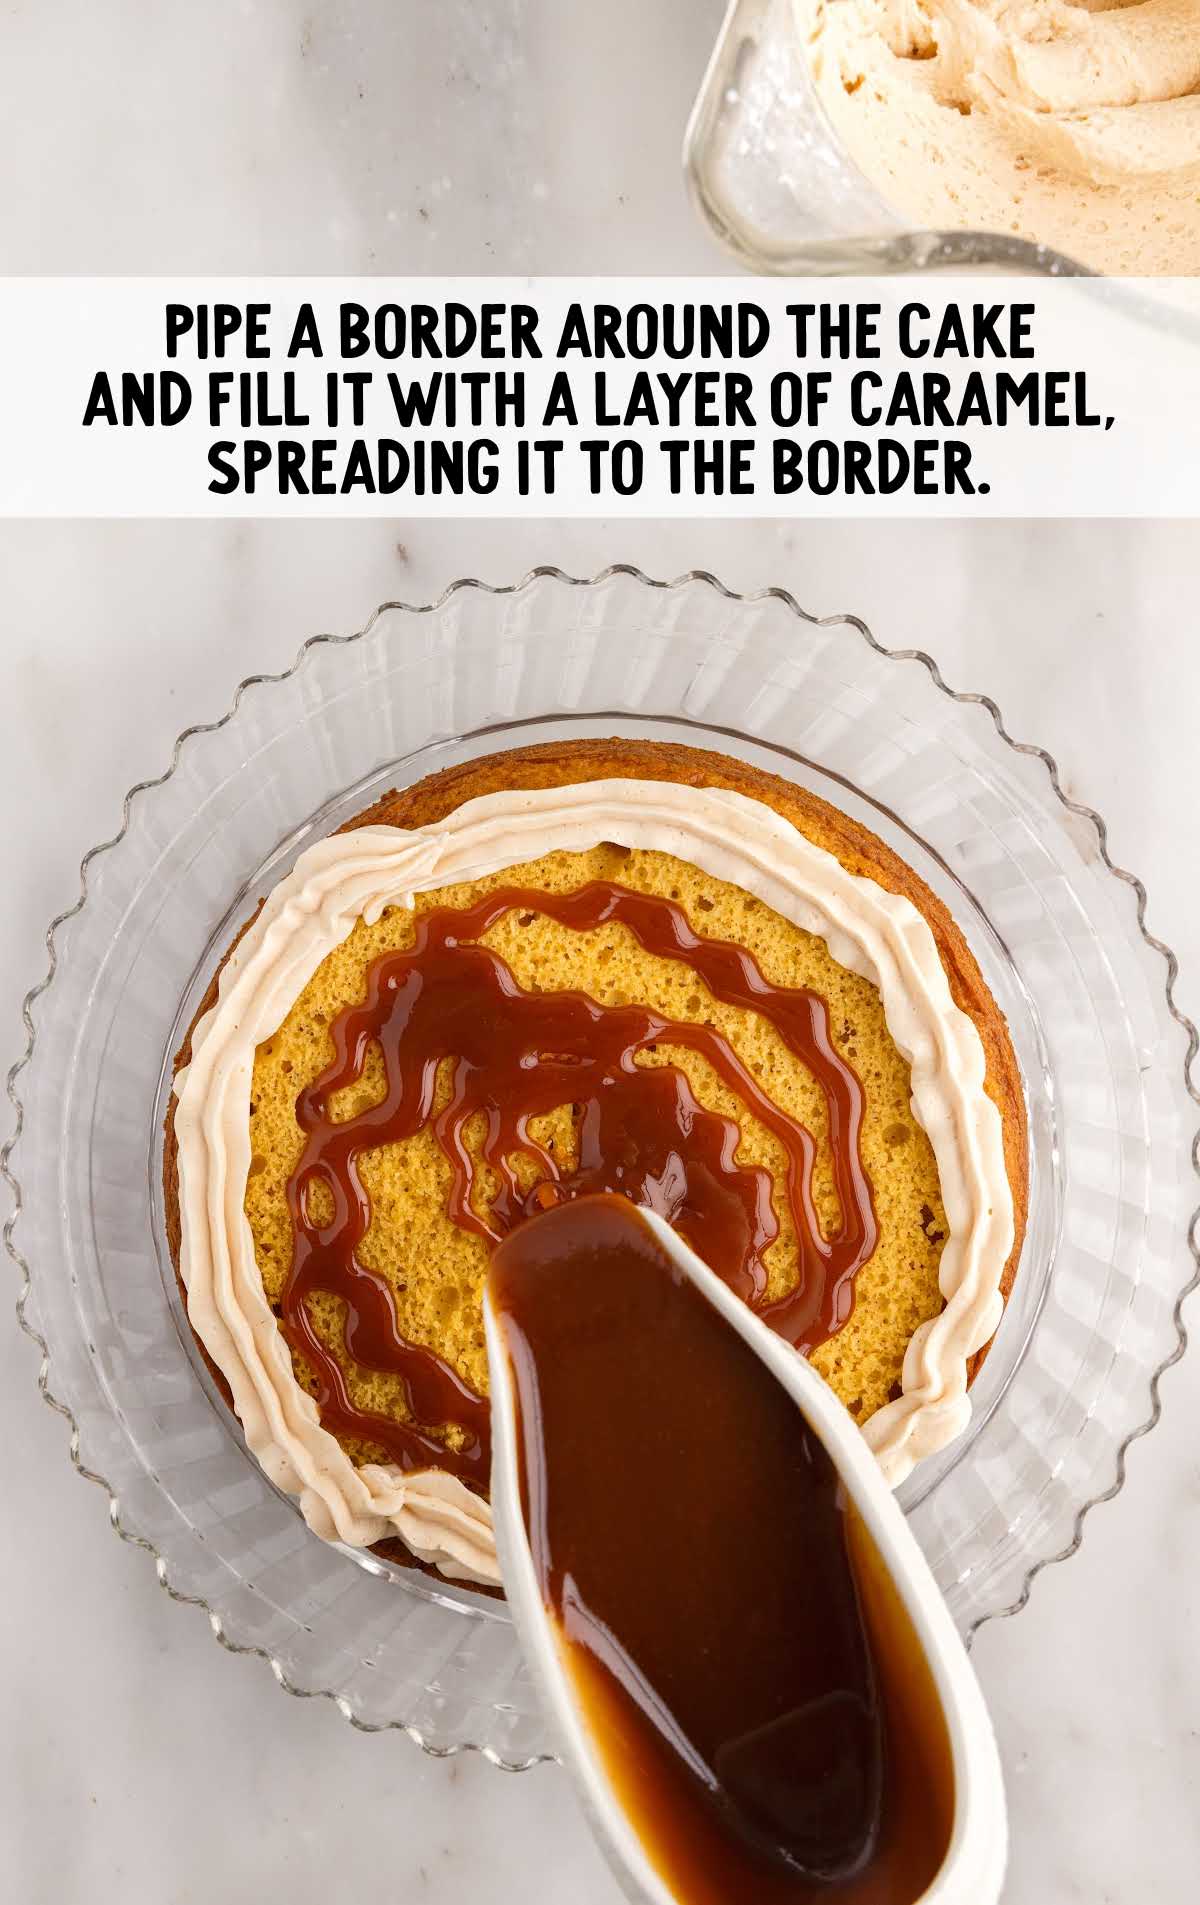 a border piped around the cake and filled with a layer of caramel